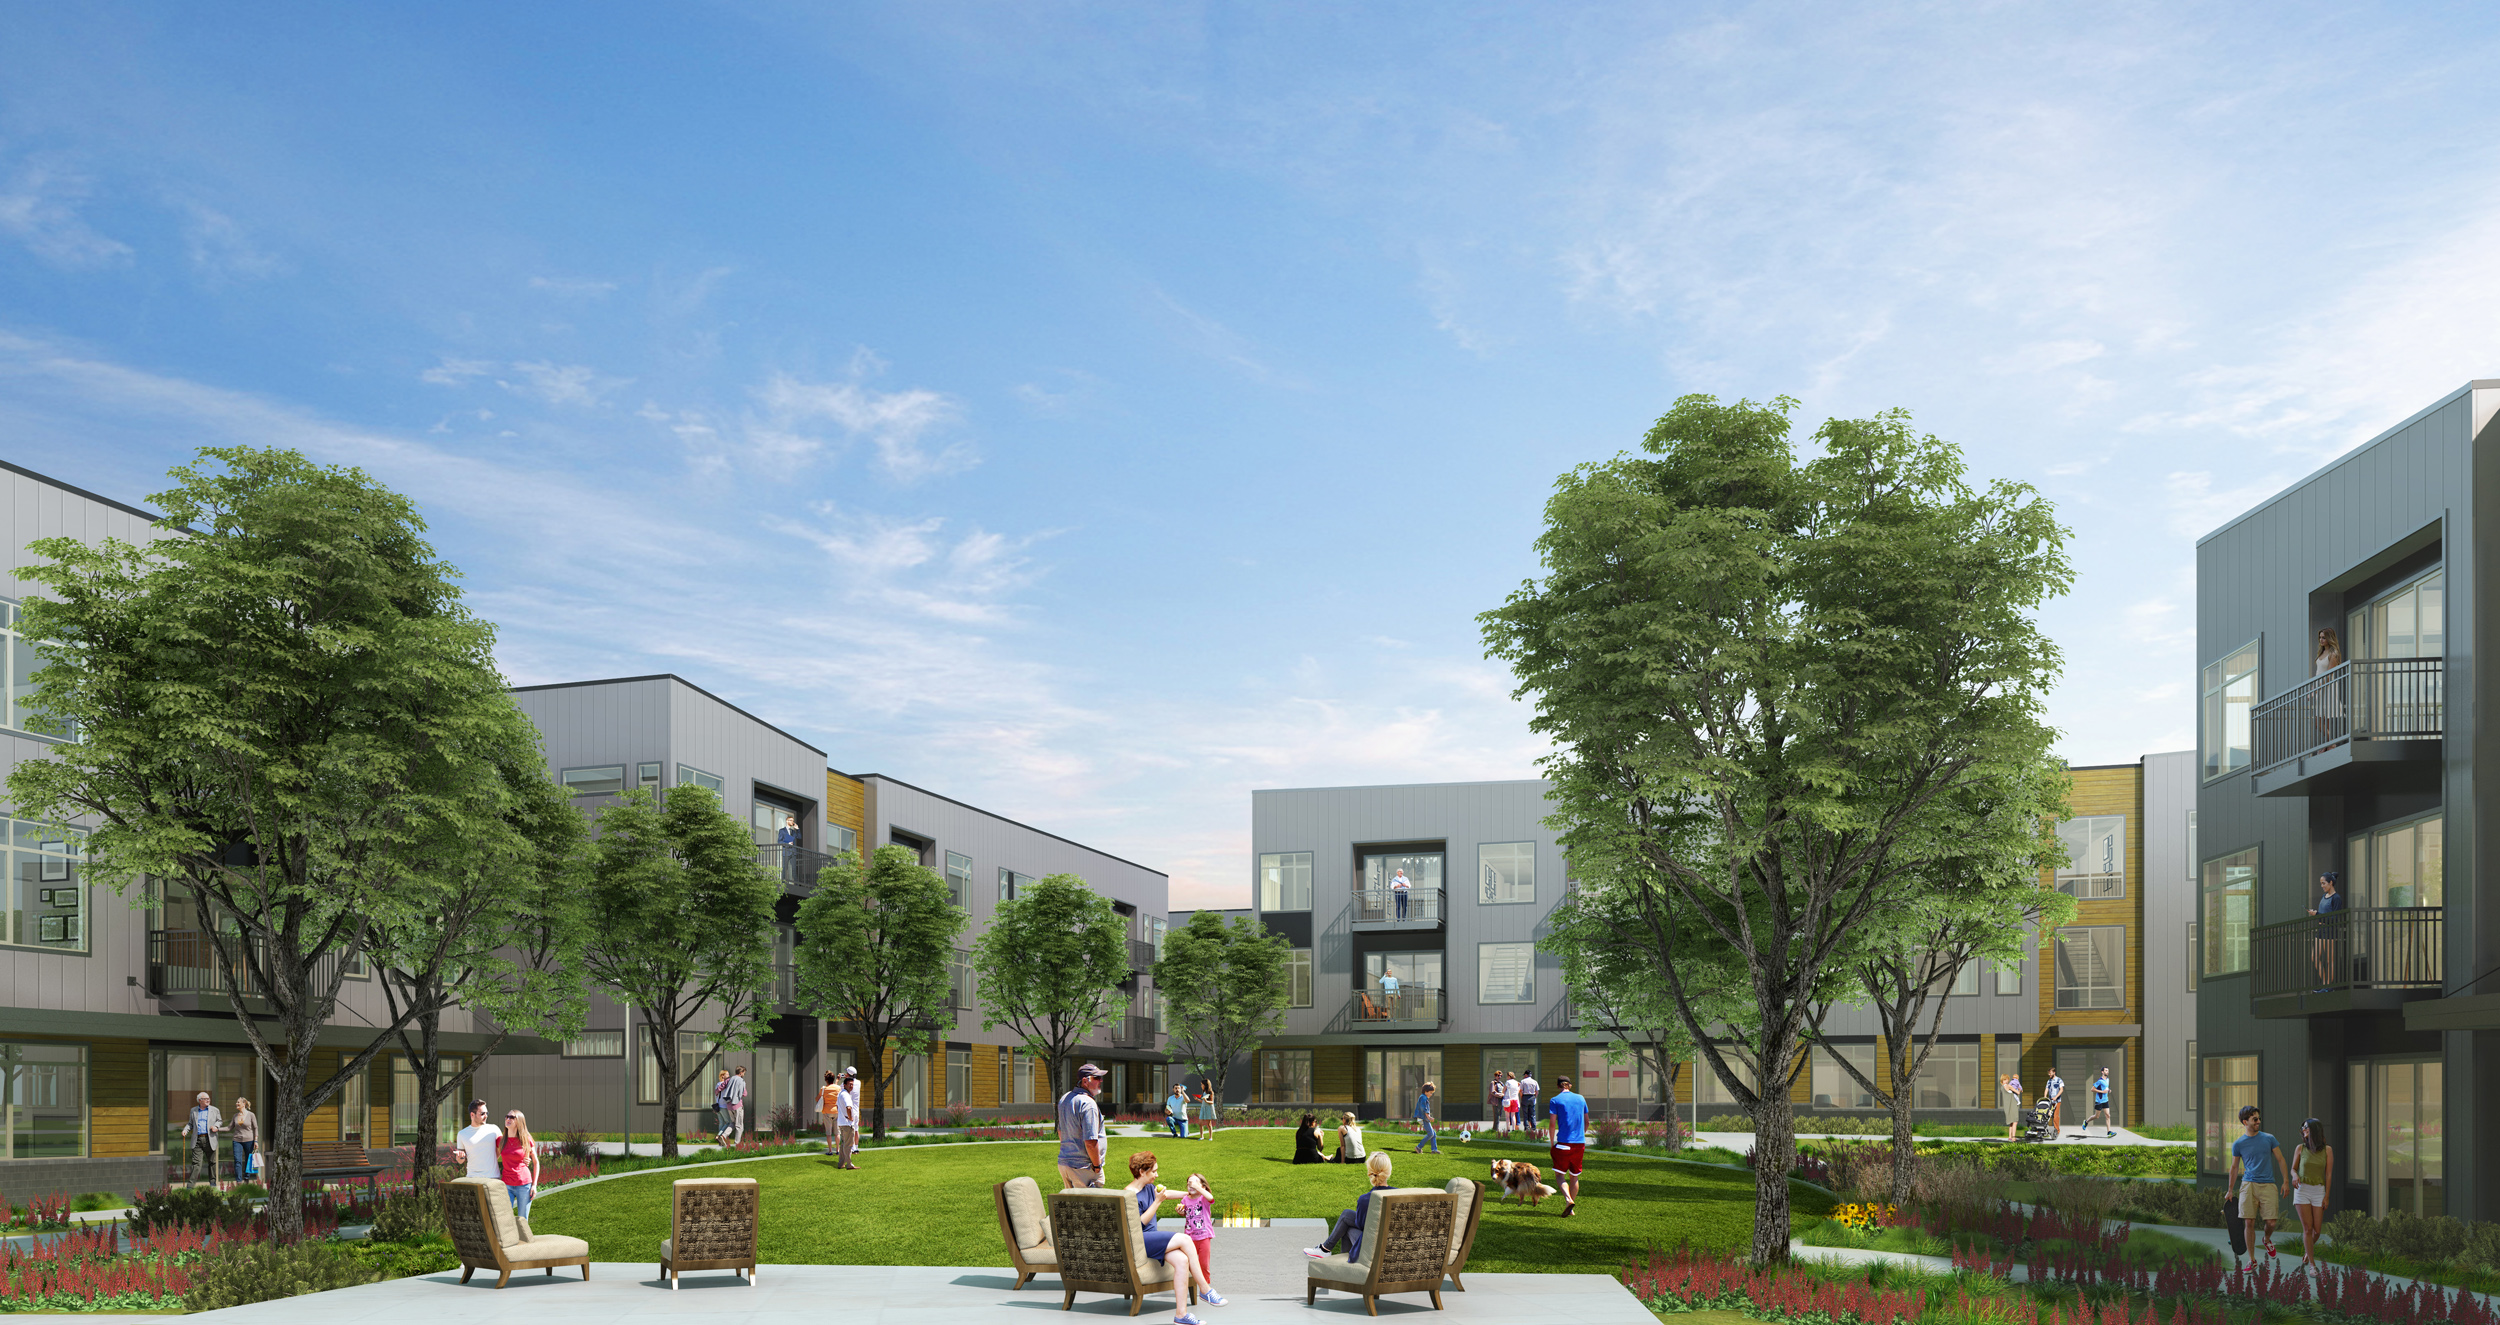 artist rendering of clovis point, an apartment community in longmont, co